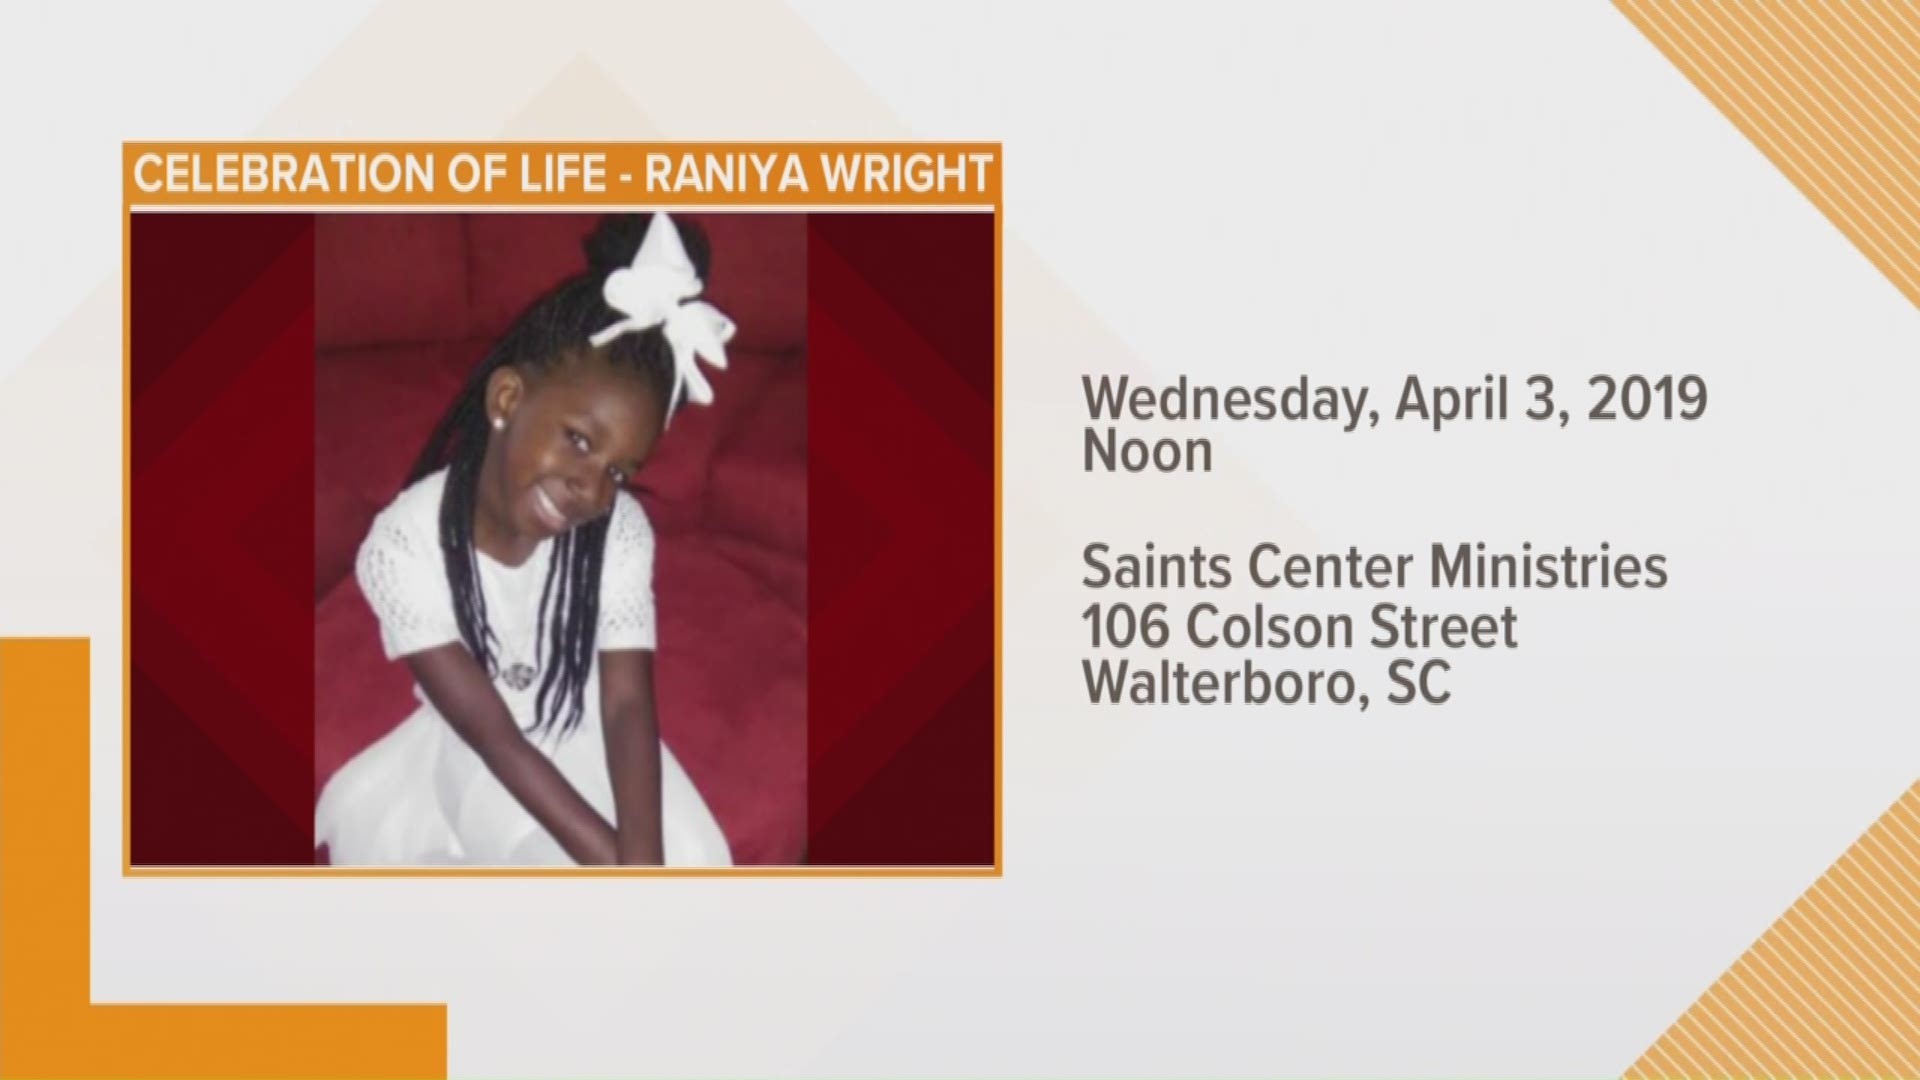 The father of Raniya Wright, the South Carolina girl who died after a classroom fight, says he's heard almost nothing from the school or investigators.